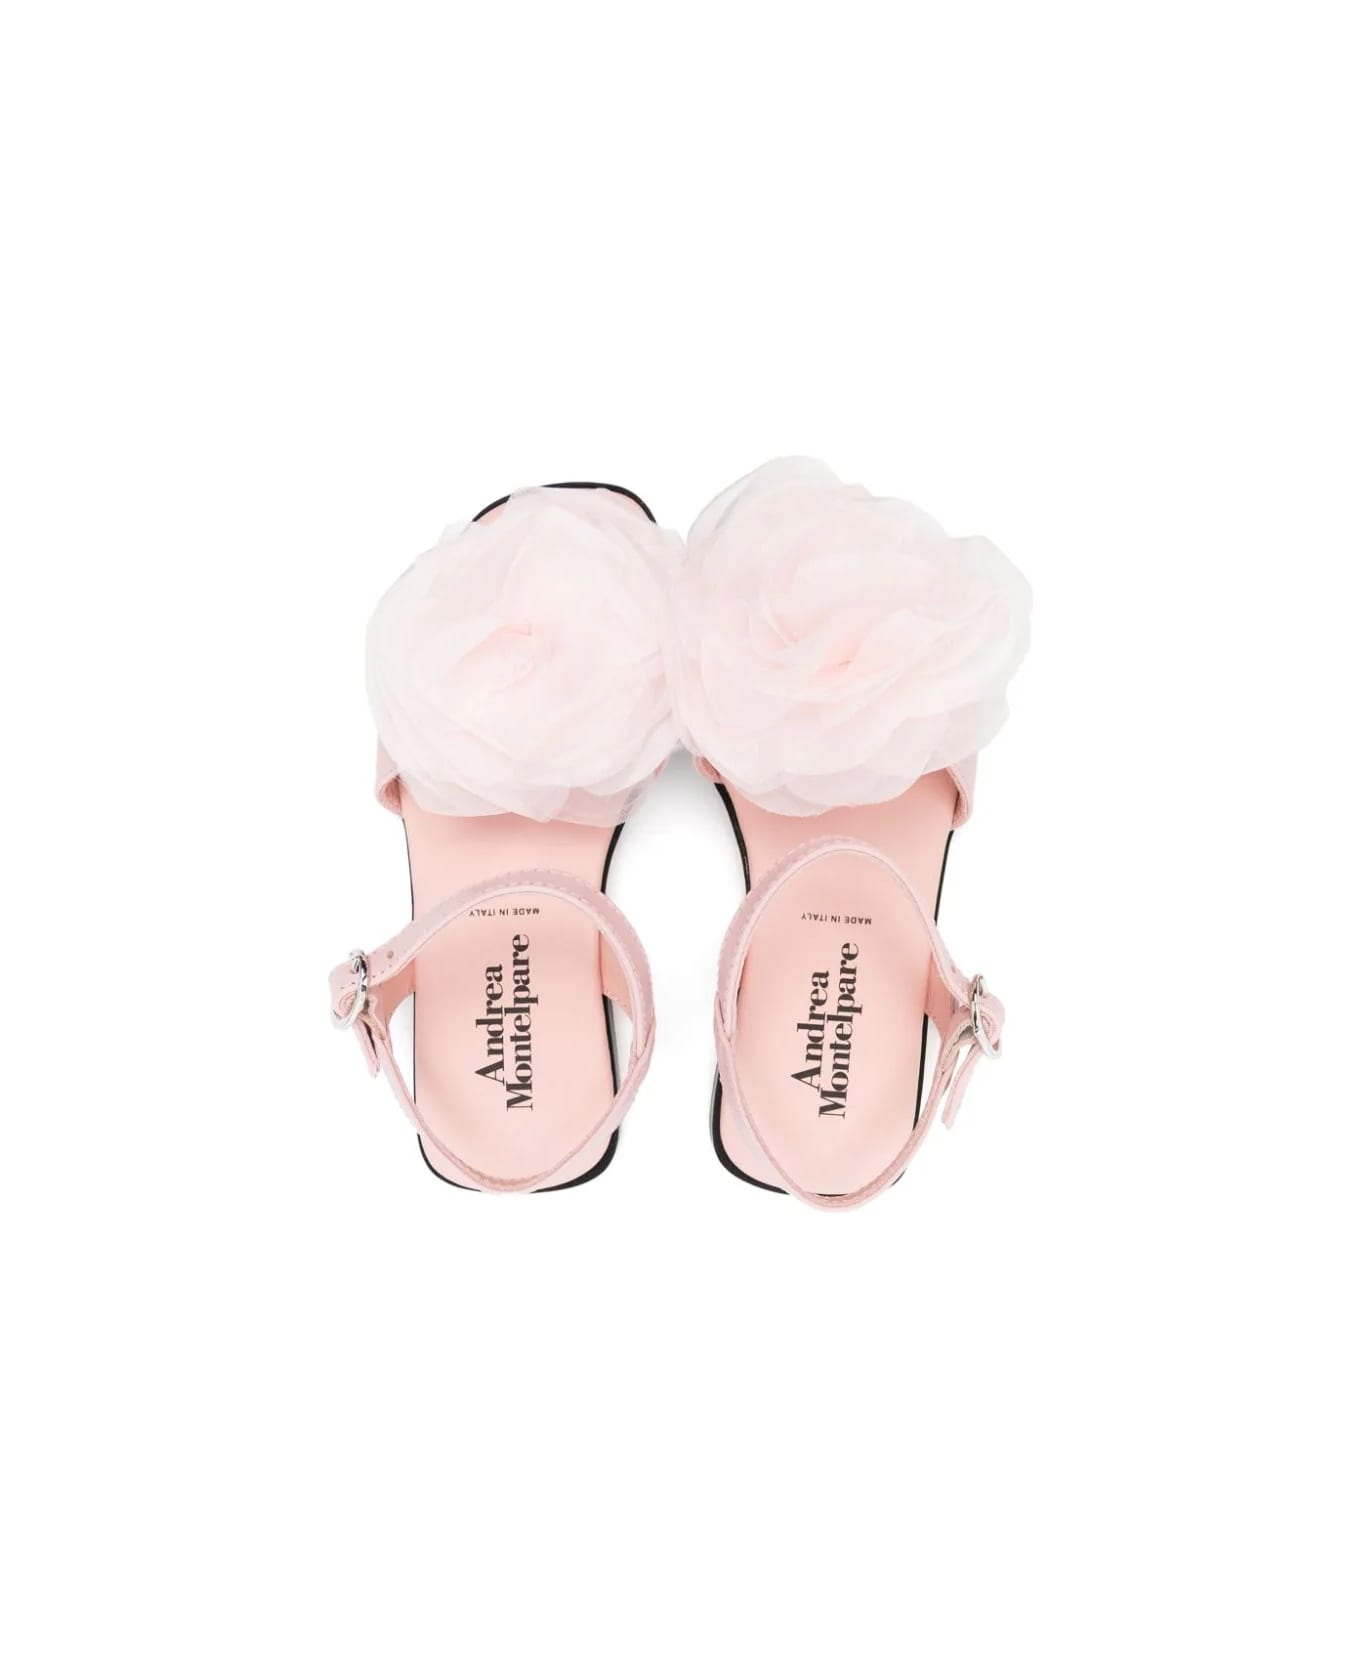 Andrea Montelpare Sandal With Applications - Pink